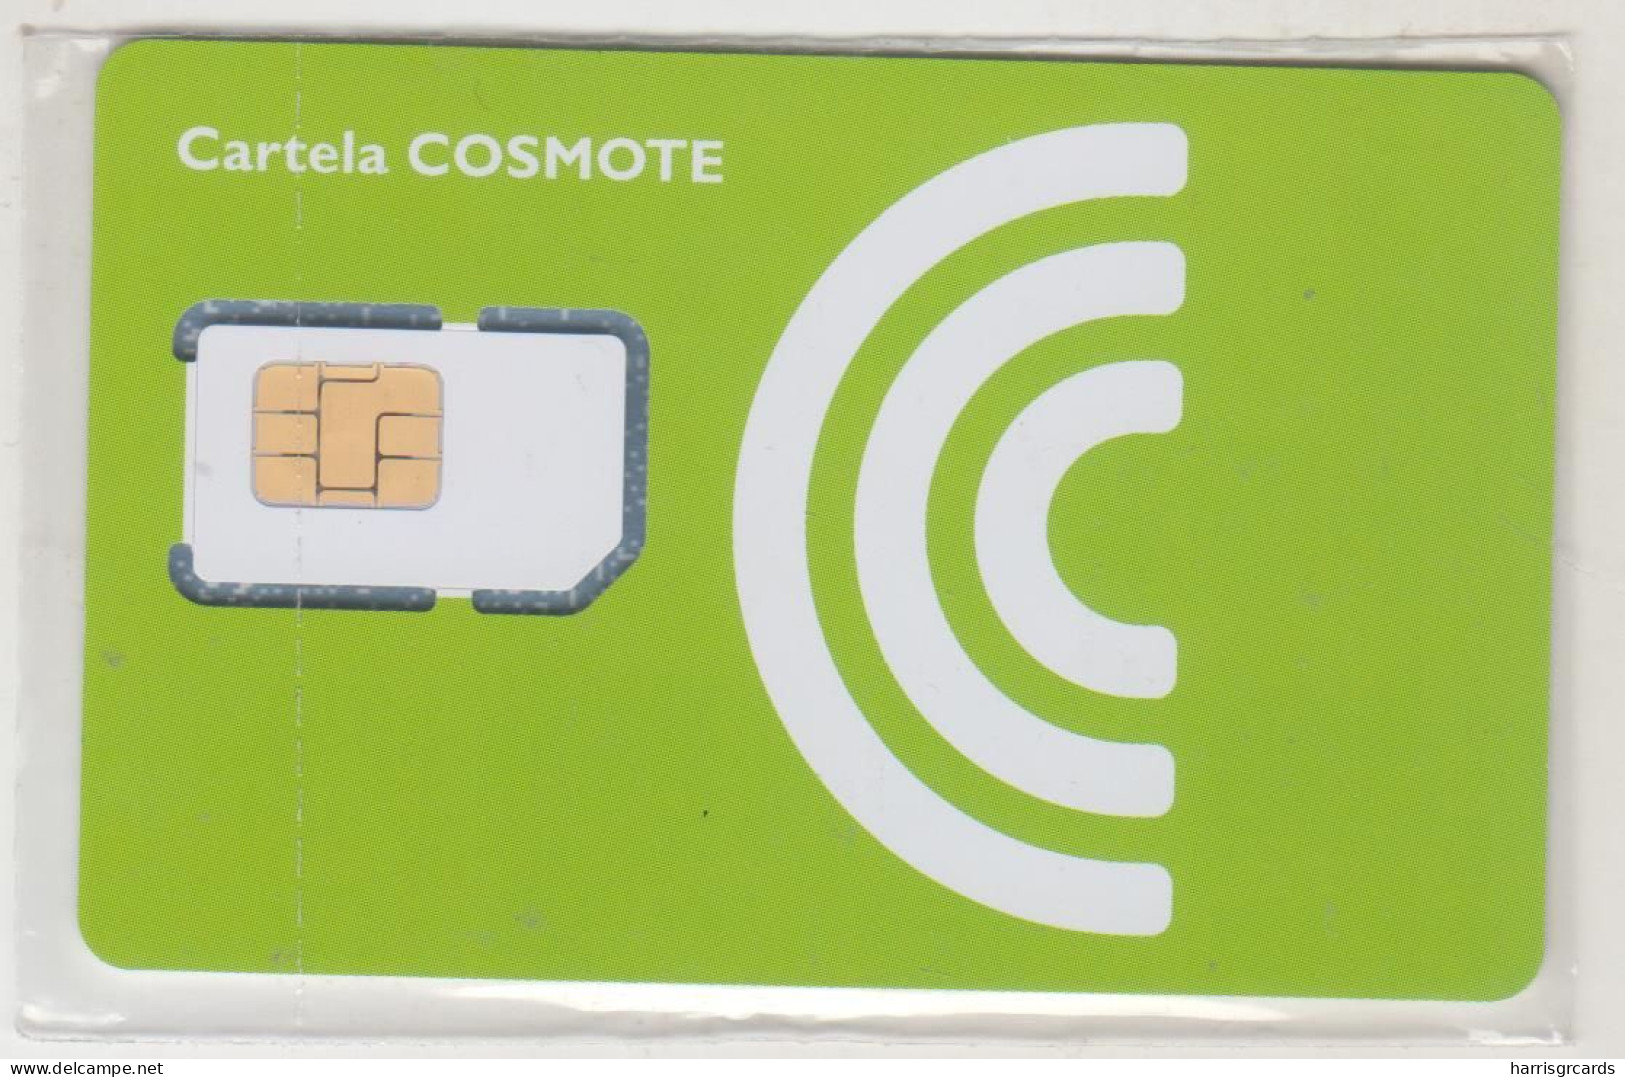 ROMANIA - Cosmote 4th Edition, Cosmote GSM Card, Mint In Blister - Roumanie